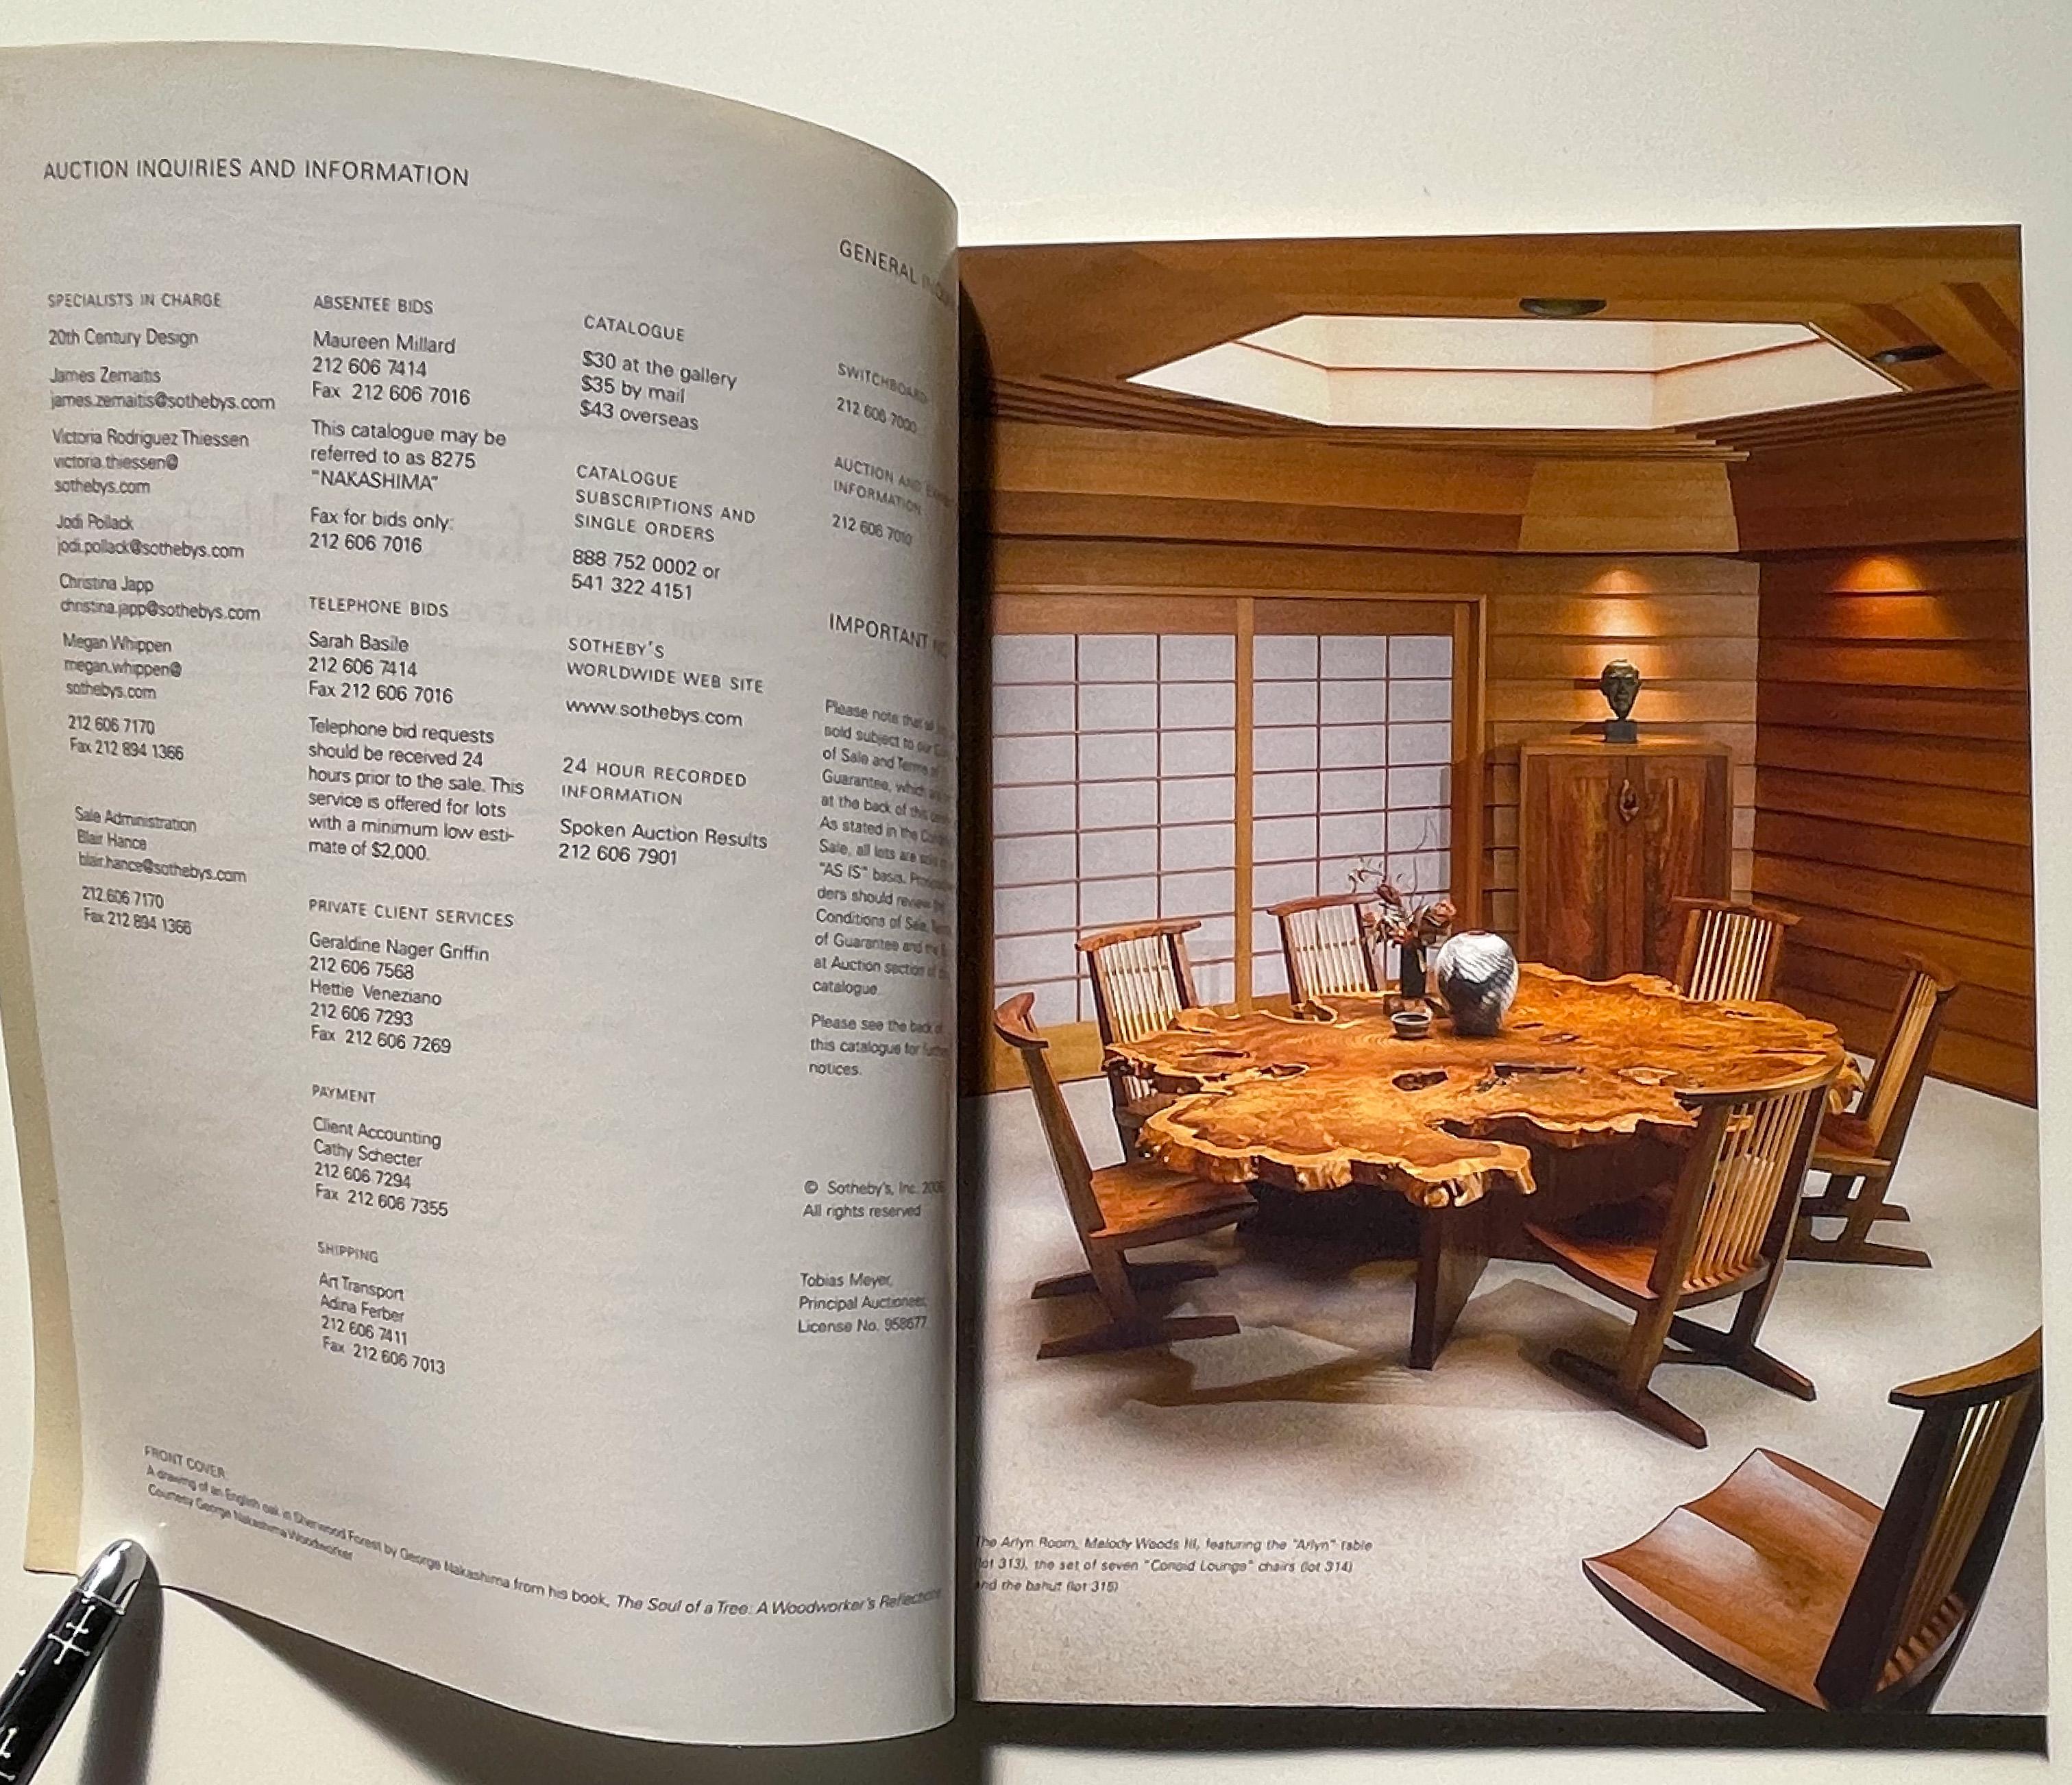 Catalog of a sale held at Sotheby’s, New York, on December 15, 2006, showcasing the Arthur and Evelyn Krosnick collection of George Nakashima furniture and lighting, or actually the second collection, as the first—112 pieces-- was completely